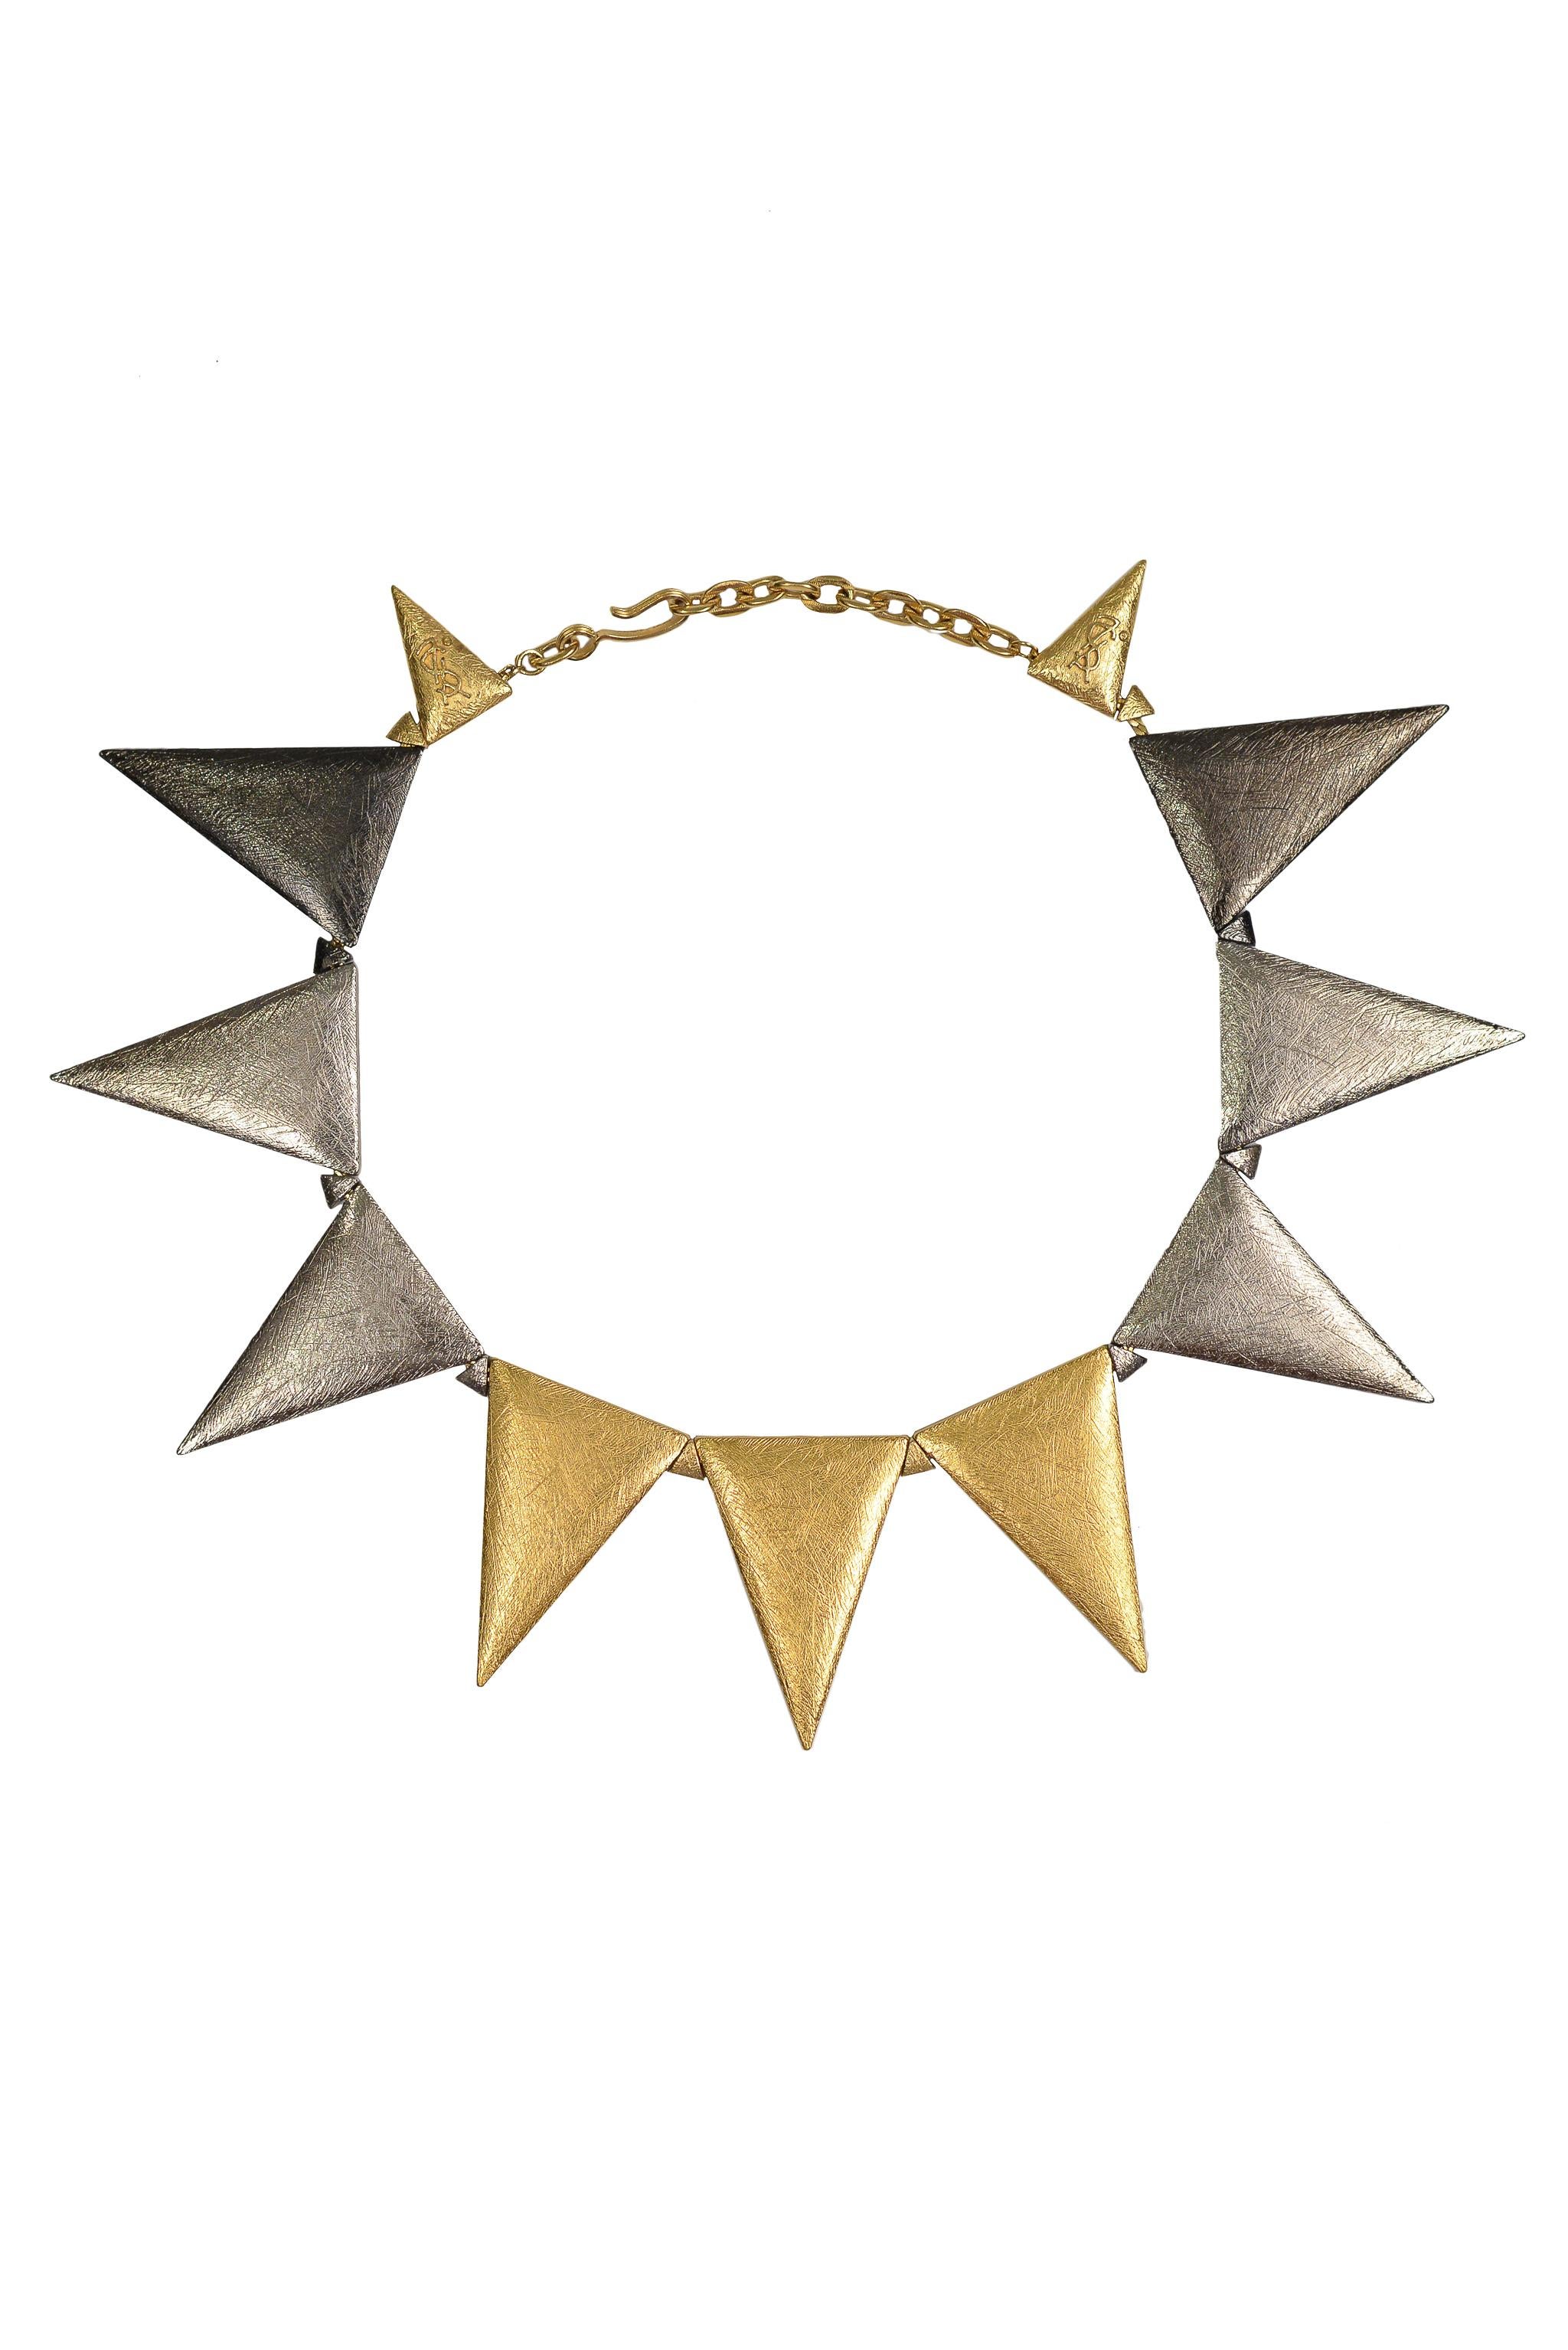 Yves Saint Laurent Ysl Tri-Tone Metal Spike Necklace 1980S In Excellent Condition For Sale In Los Angeles, CA